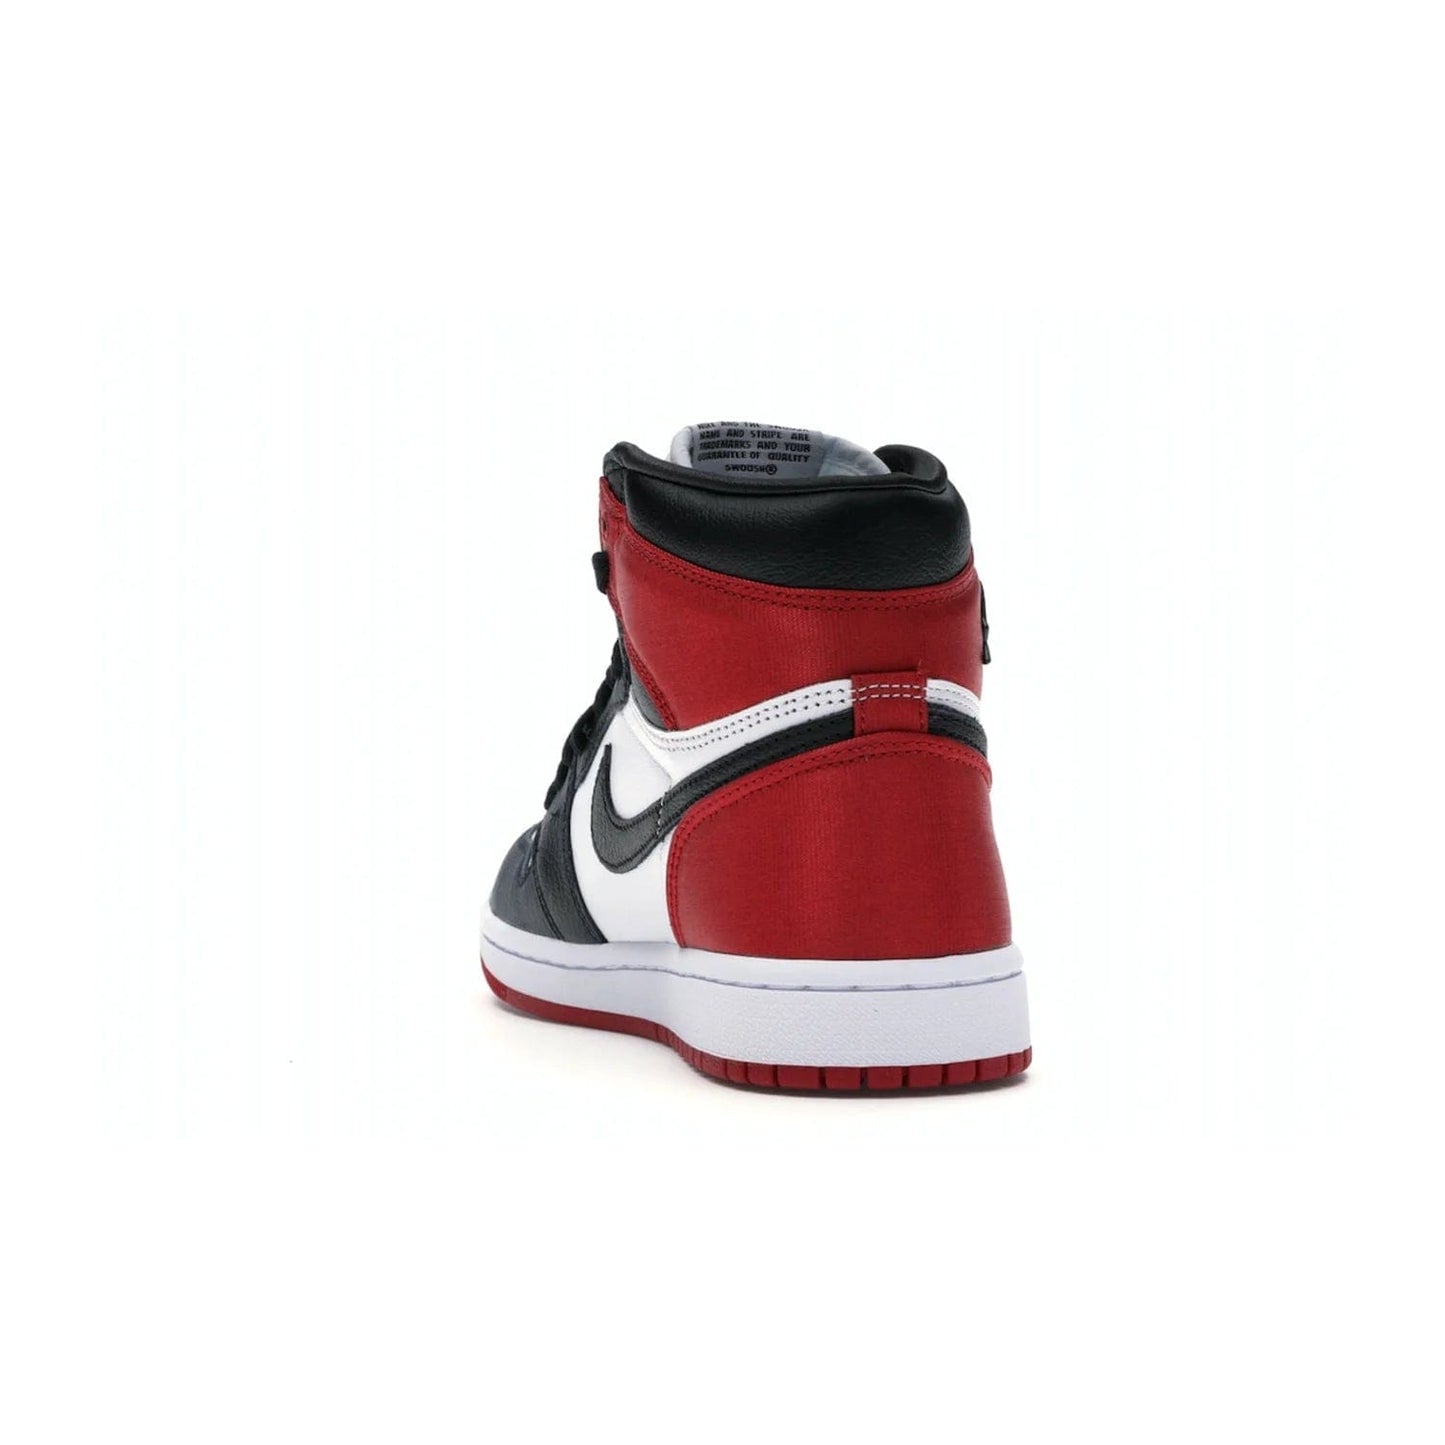 Jordan 1 Retro High Satin Black Toe (Women's) - Image 26 - Only at www.BallersClubKickz.com - Luxurious take on the timeless Air Jordan 1. Features a mix of black leather and satin materials with subtle University Red accents. Elevated look with metal Wings logo on the heel. Released in August 2019.